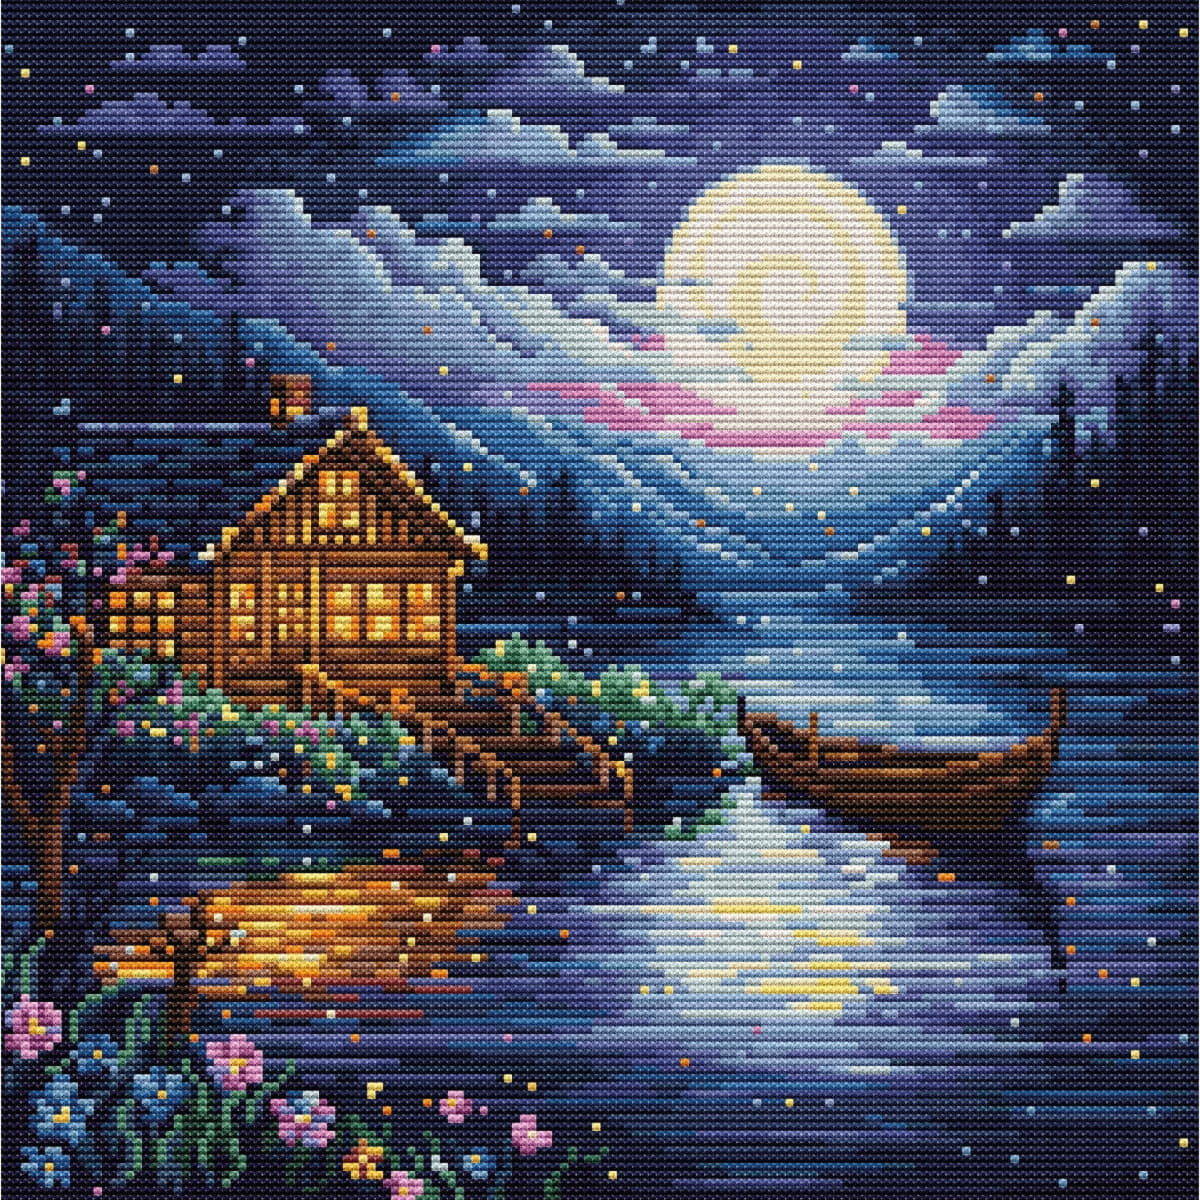 A pixel art scene shows a cozy log cabin with warm,...